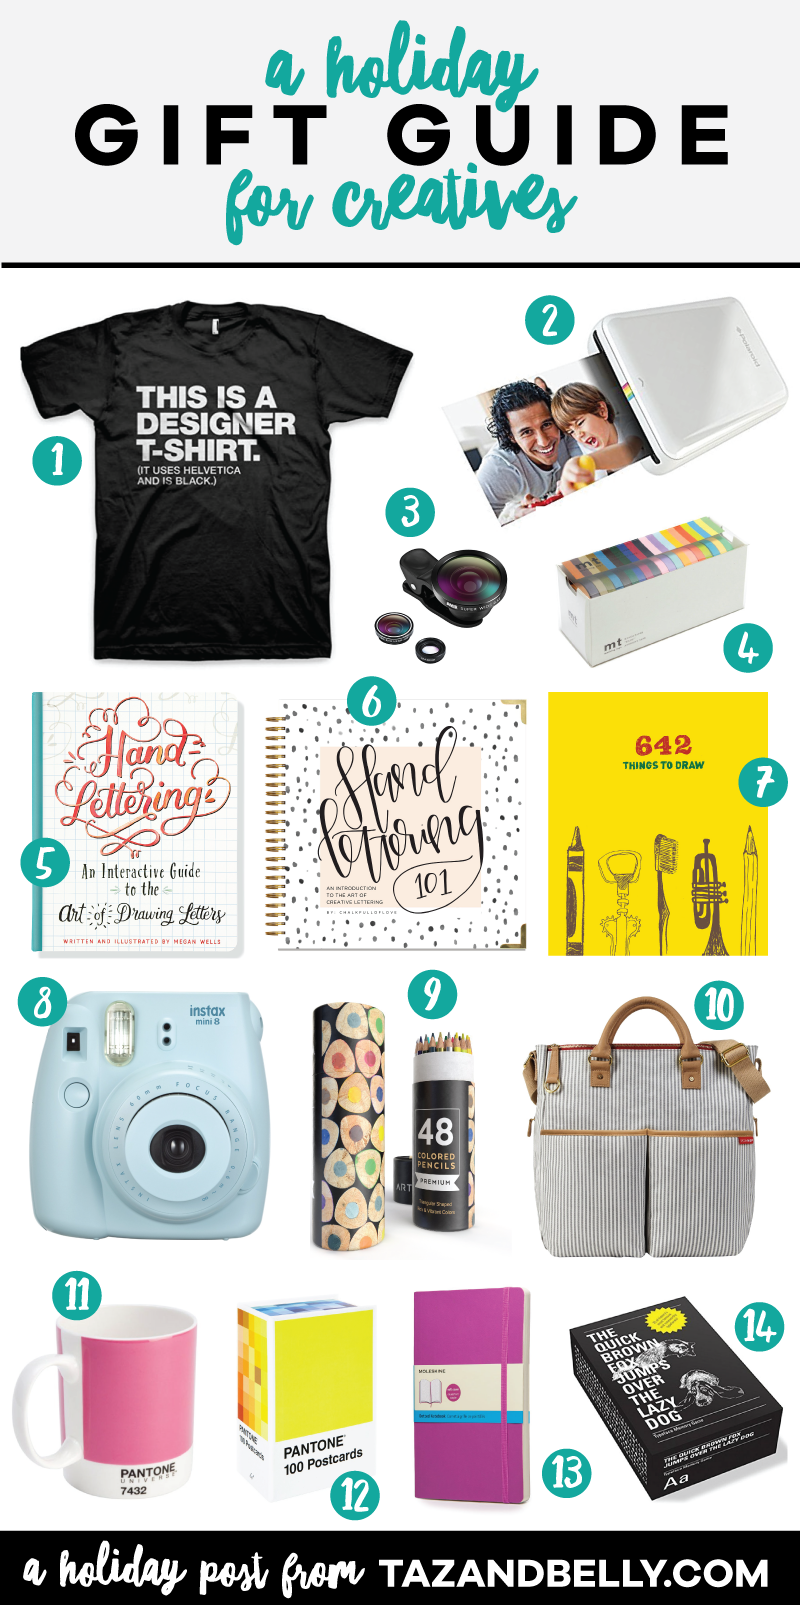 This Holiday Gift Guide for Creatives is perfect for the quirky artists and creators in your life. It includes apparel, games, books, and more! tazandbelly.com